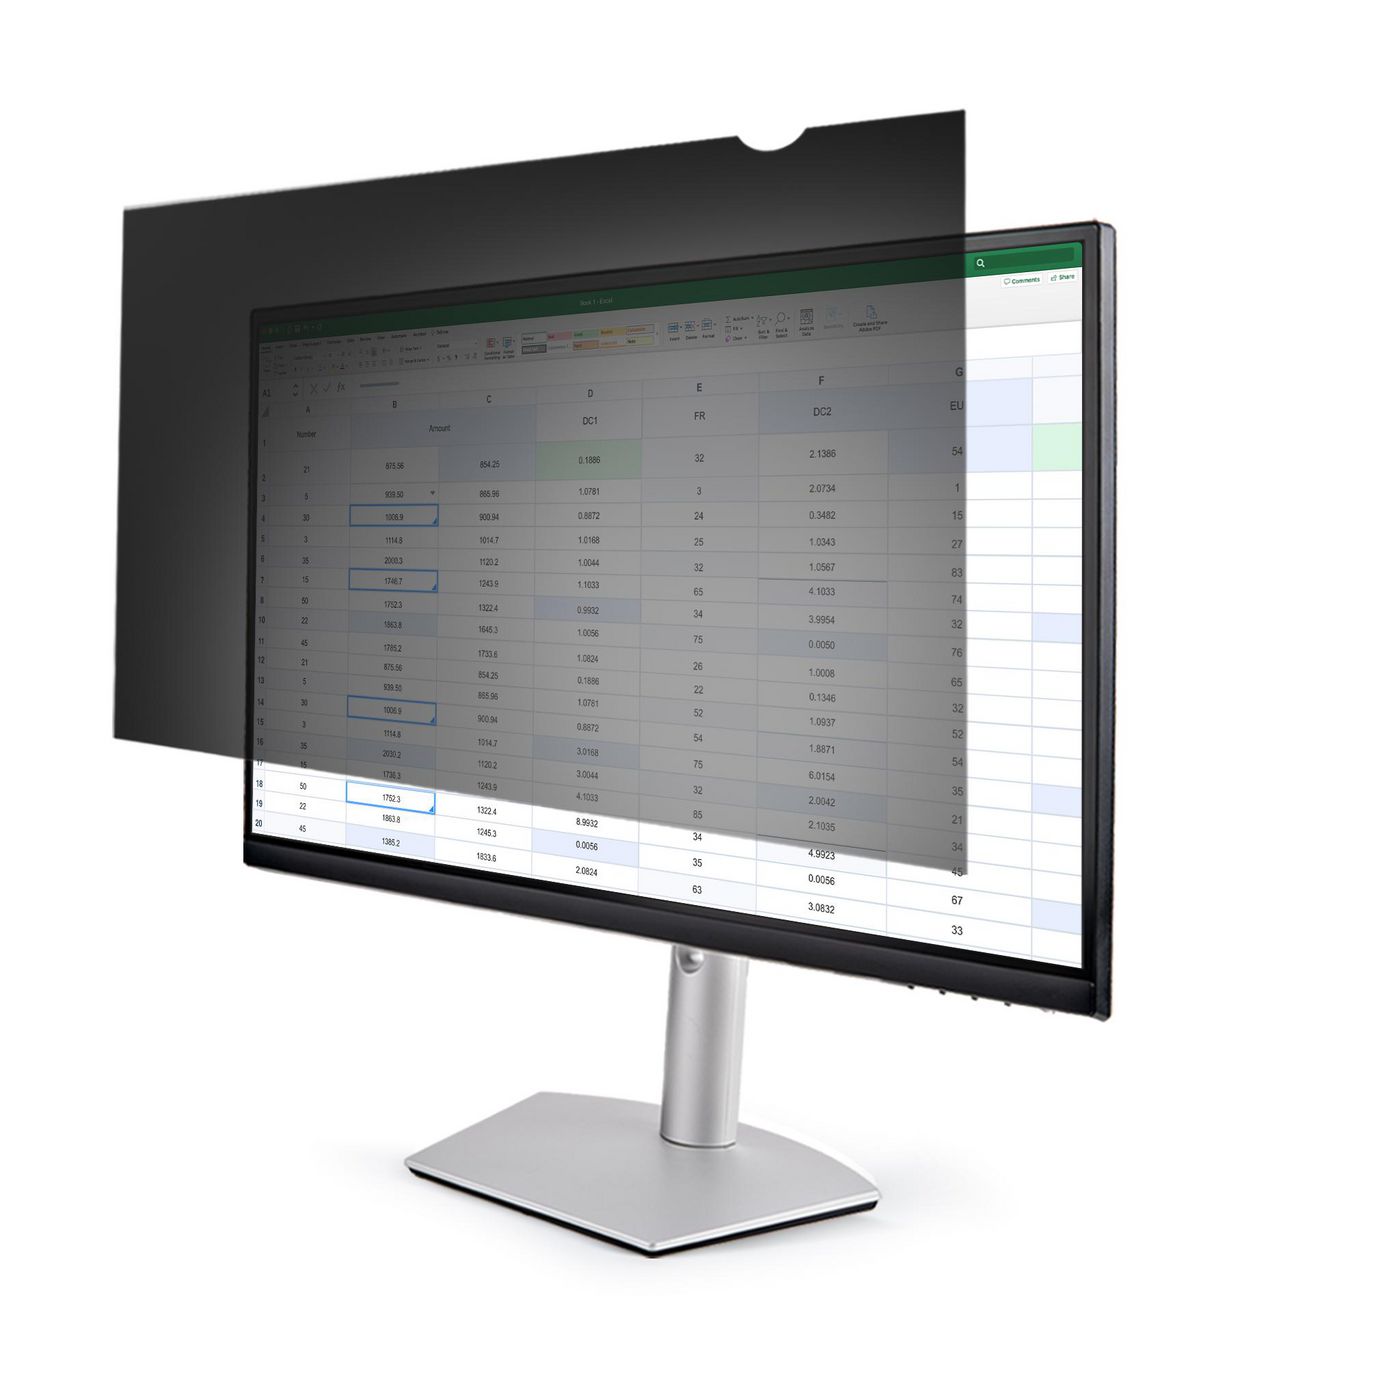 StarTechcom PRIVACY-SCREEN-24MB W128273064 Monitor Privacy Screen For 